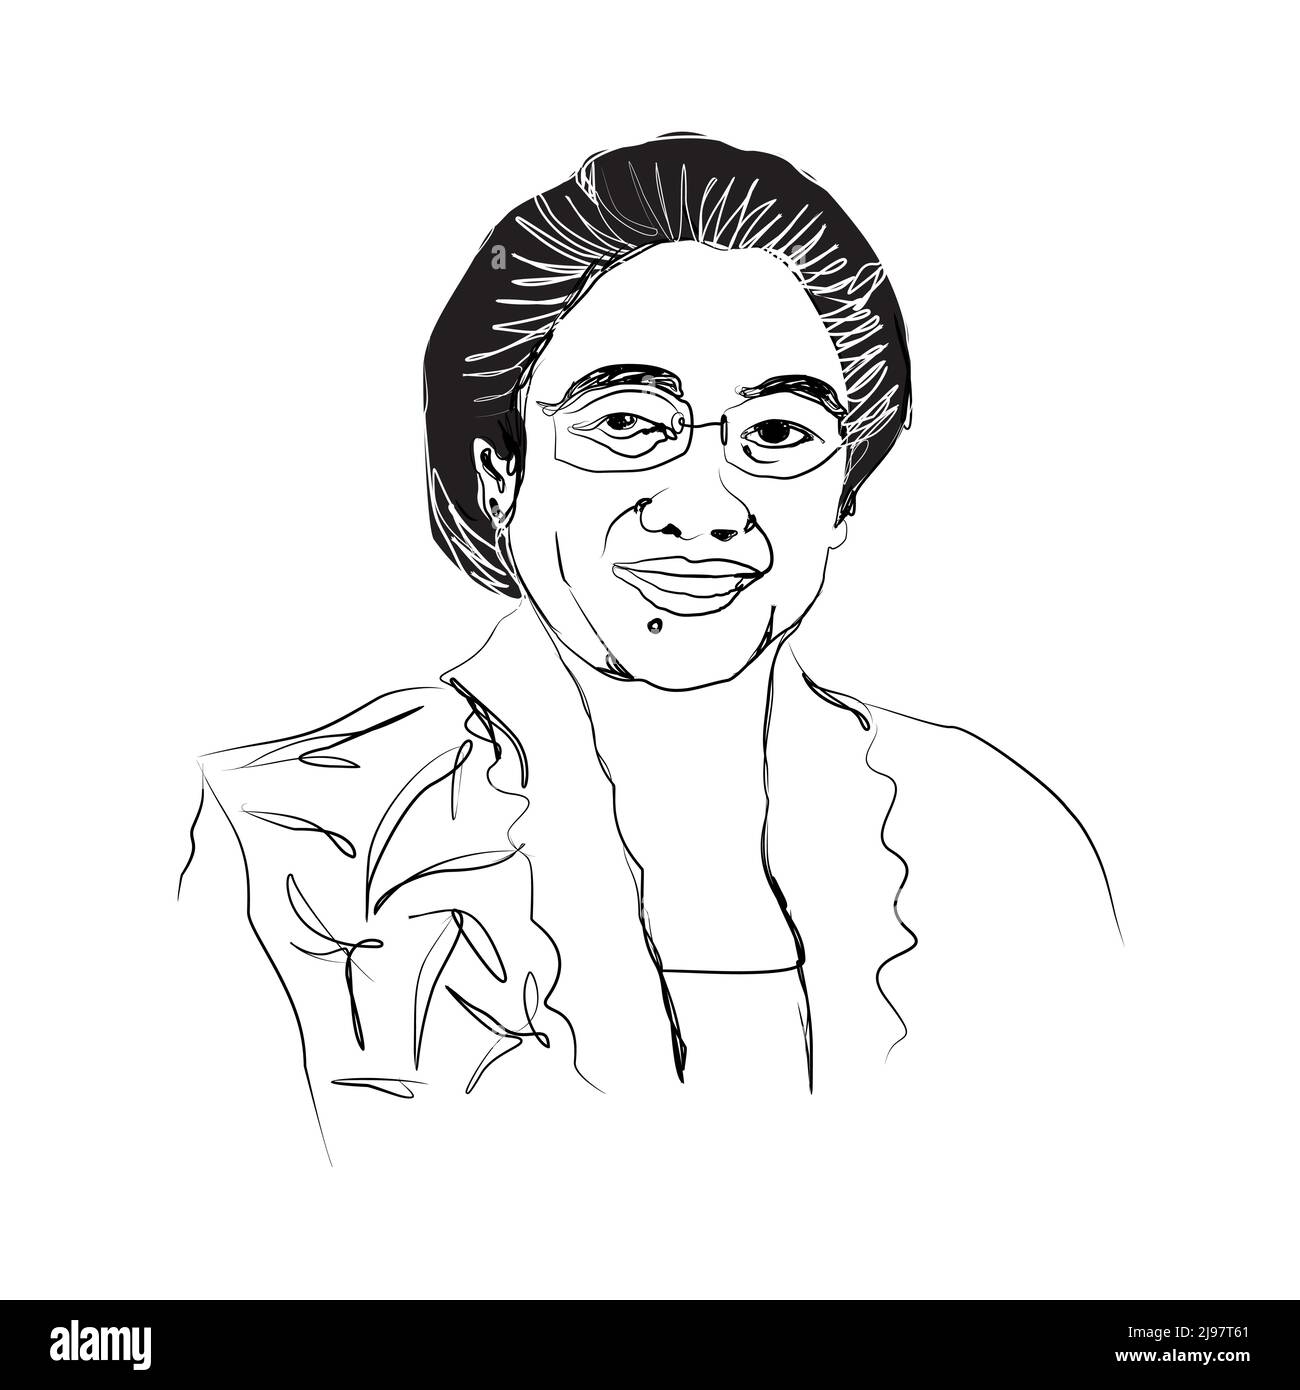 Black and white freehand sketch of the fifth President of the Republic of Indonesia. Megawati Soekarnoputri. Vector illustration Stock Vector